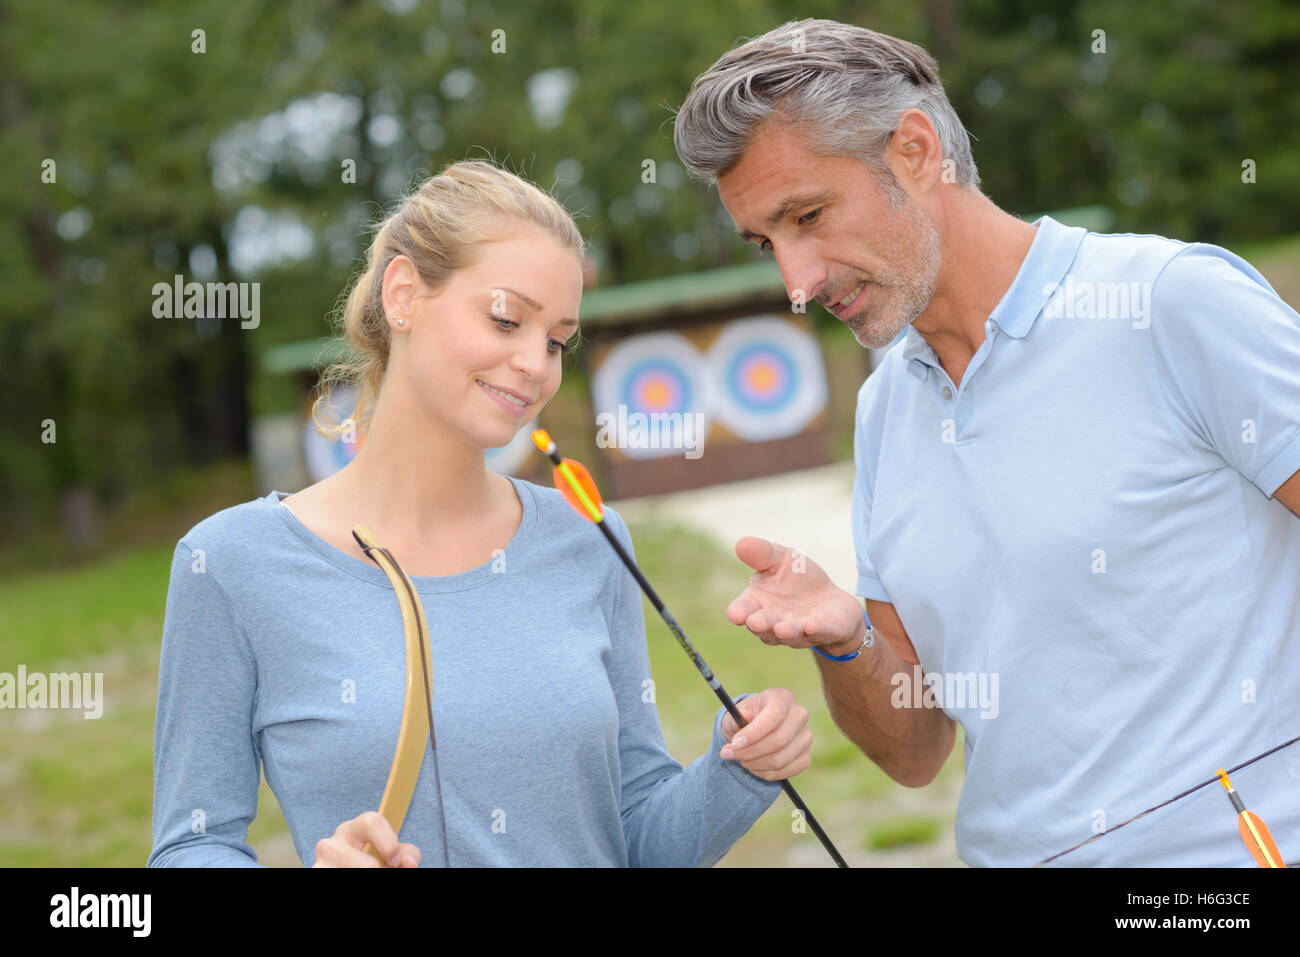 the fletching lesson Stock Photo